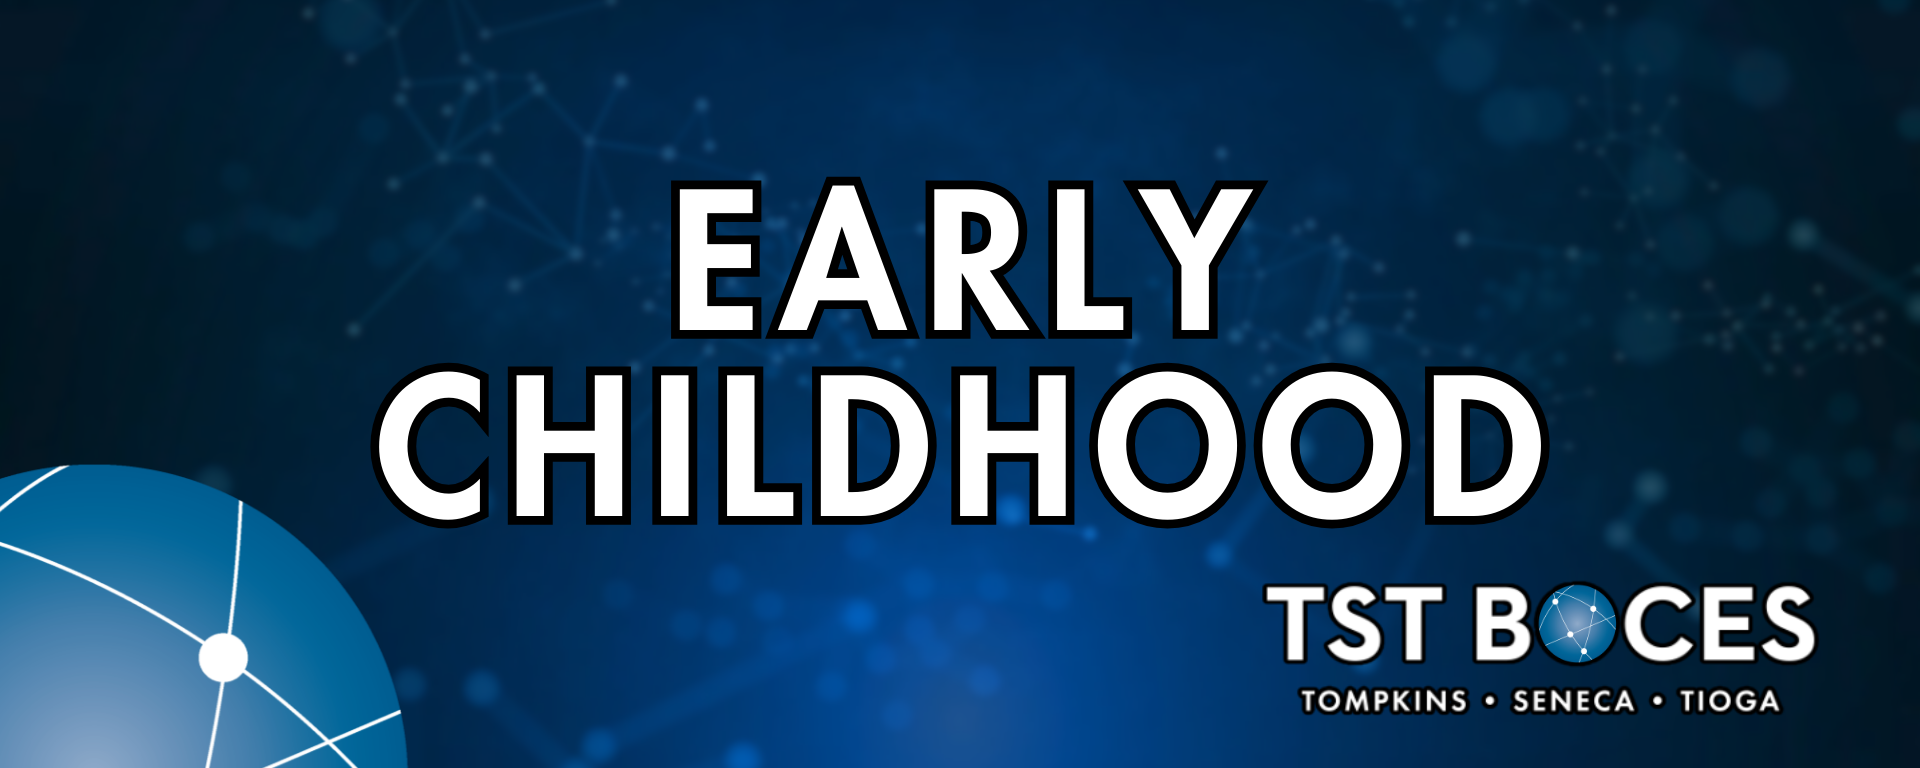 Banner- Early childhood